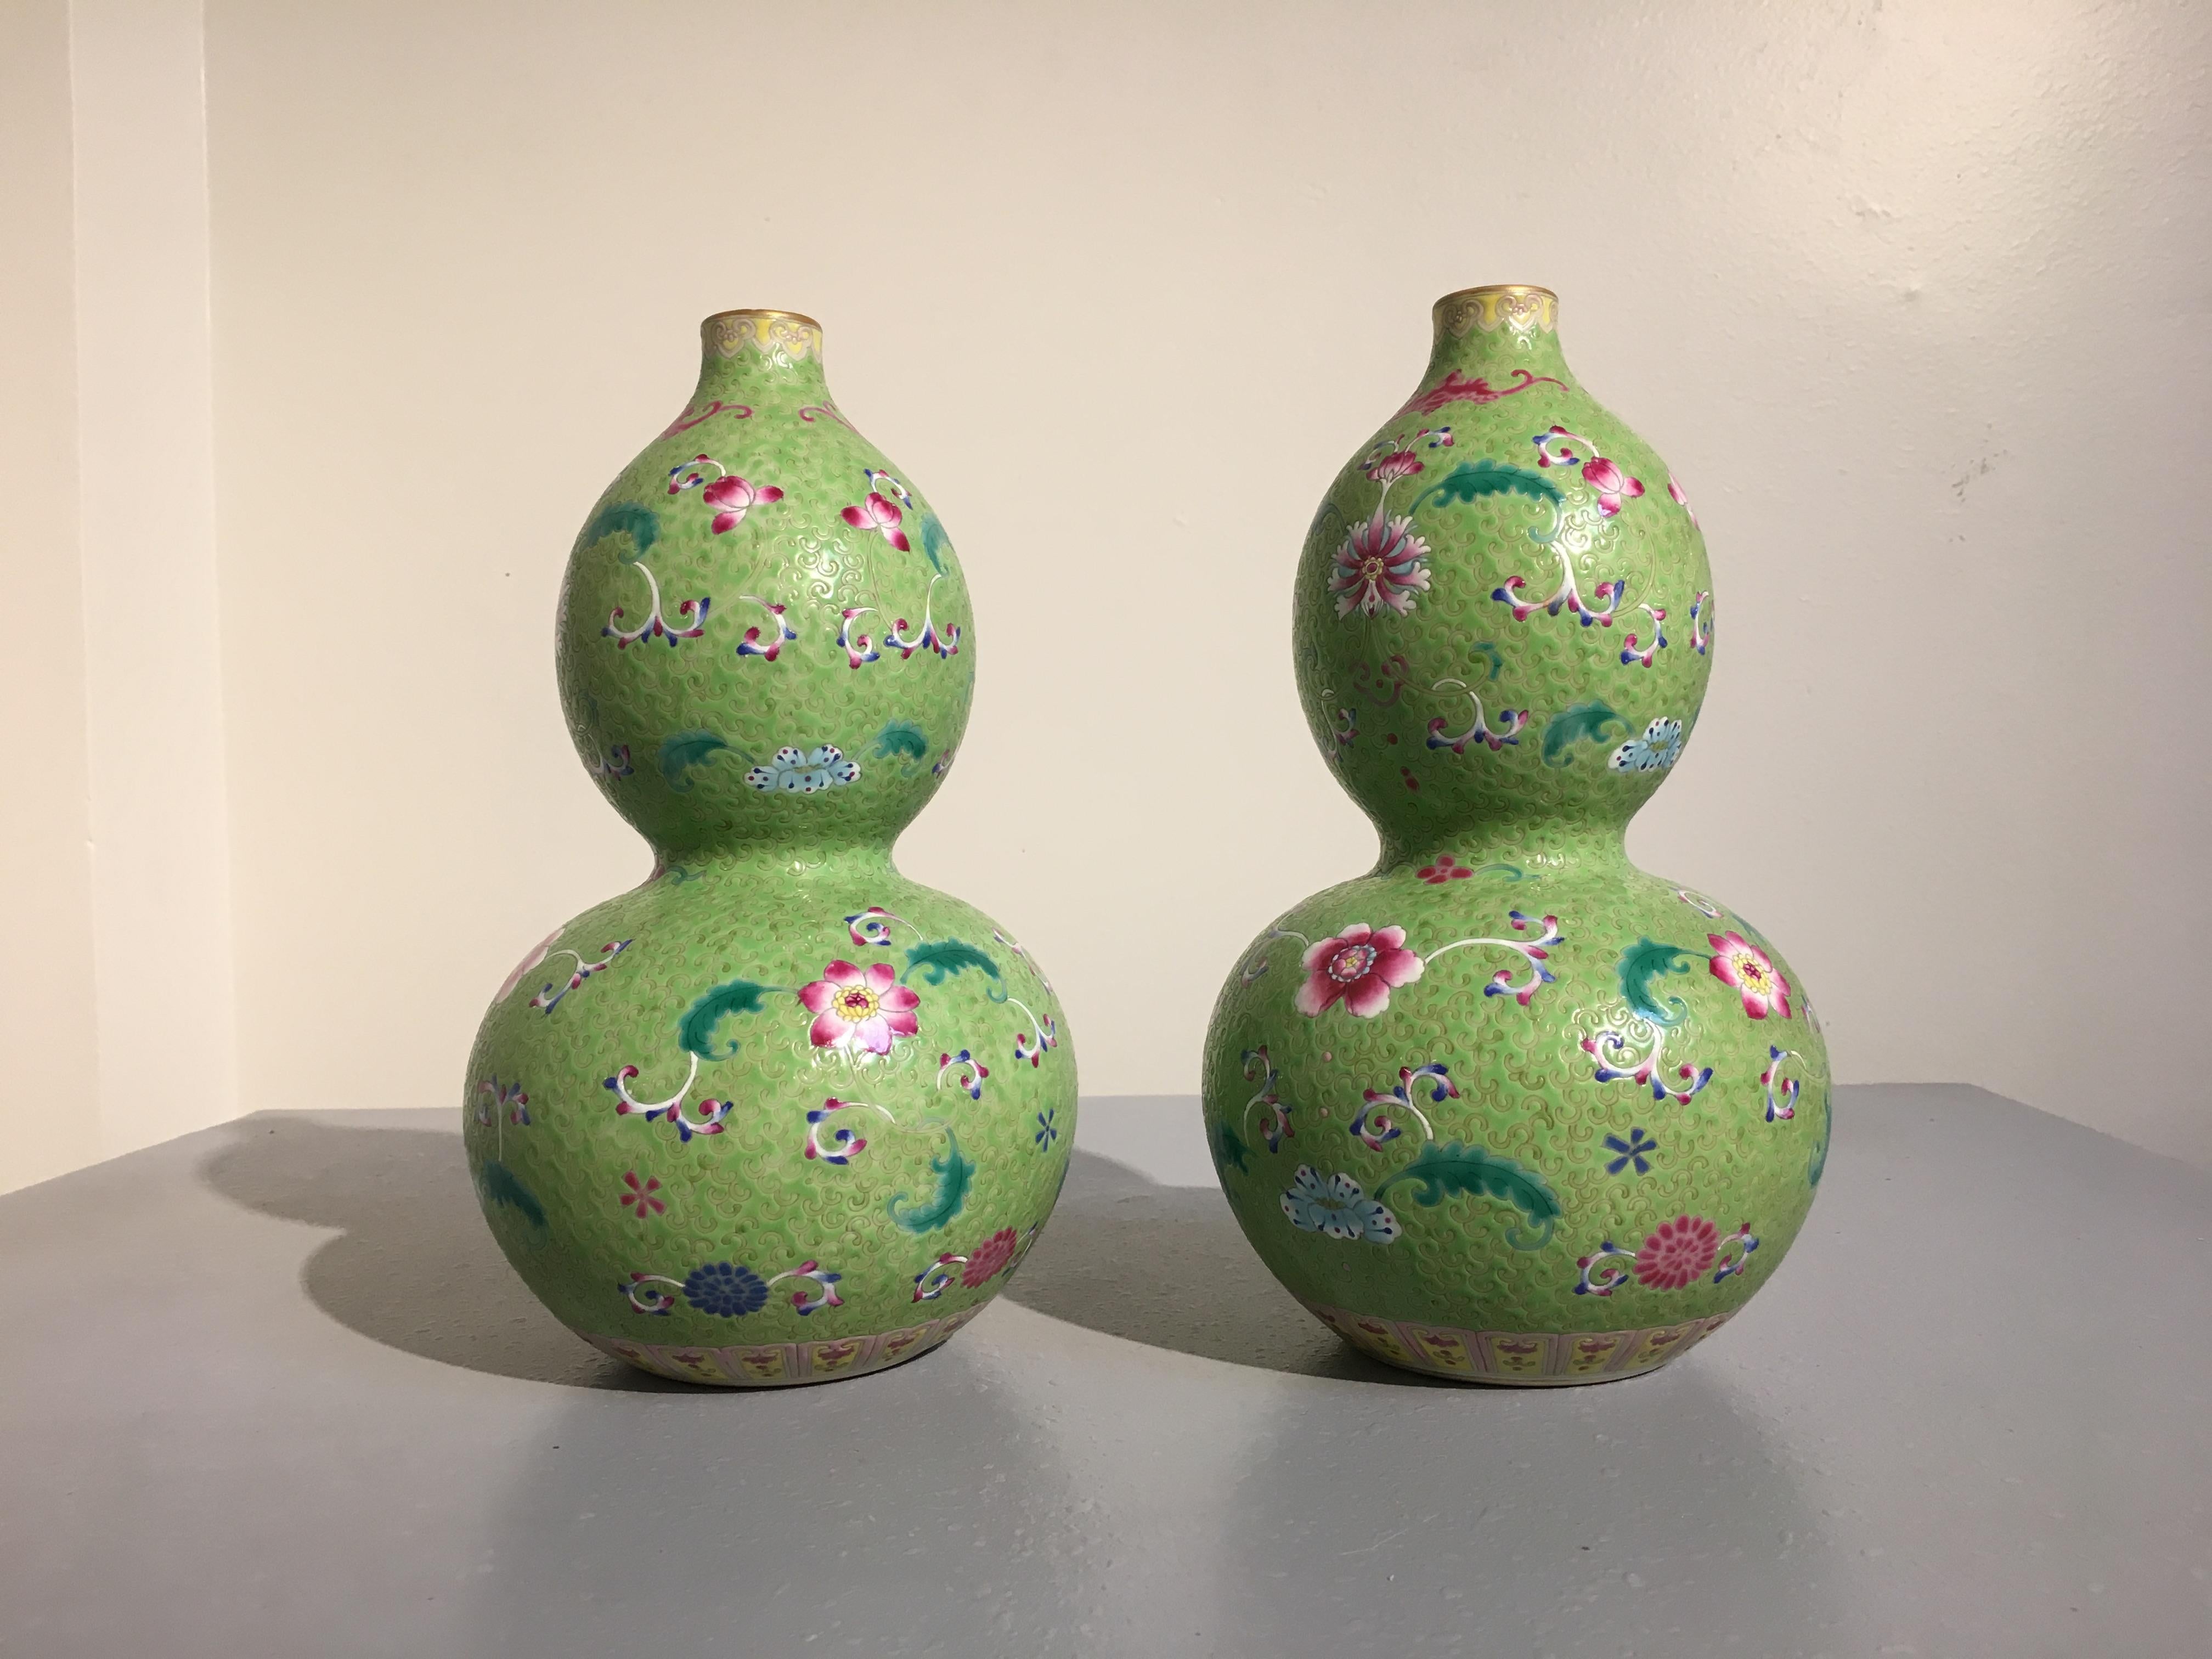 A striking pair of Chinese double gourd porcelain vases finely decorated in Famille rose enamels on a lime green sgraffito ground, Republic period (1912-1949), mid-20th century, China.

The decoration reminiscent of Qing imperial wares, with lotus